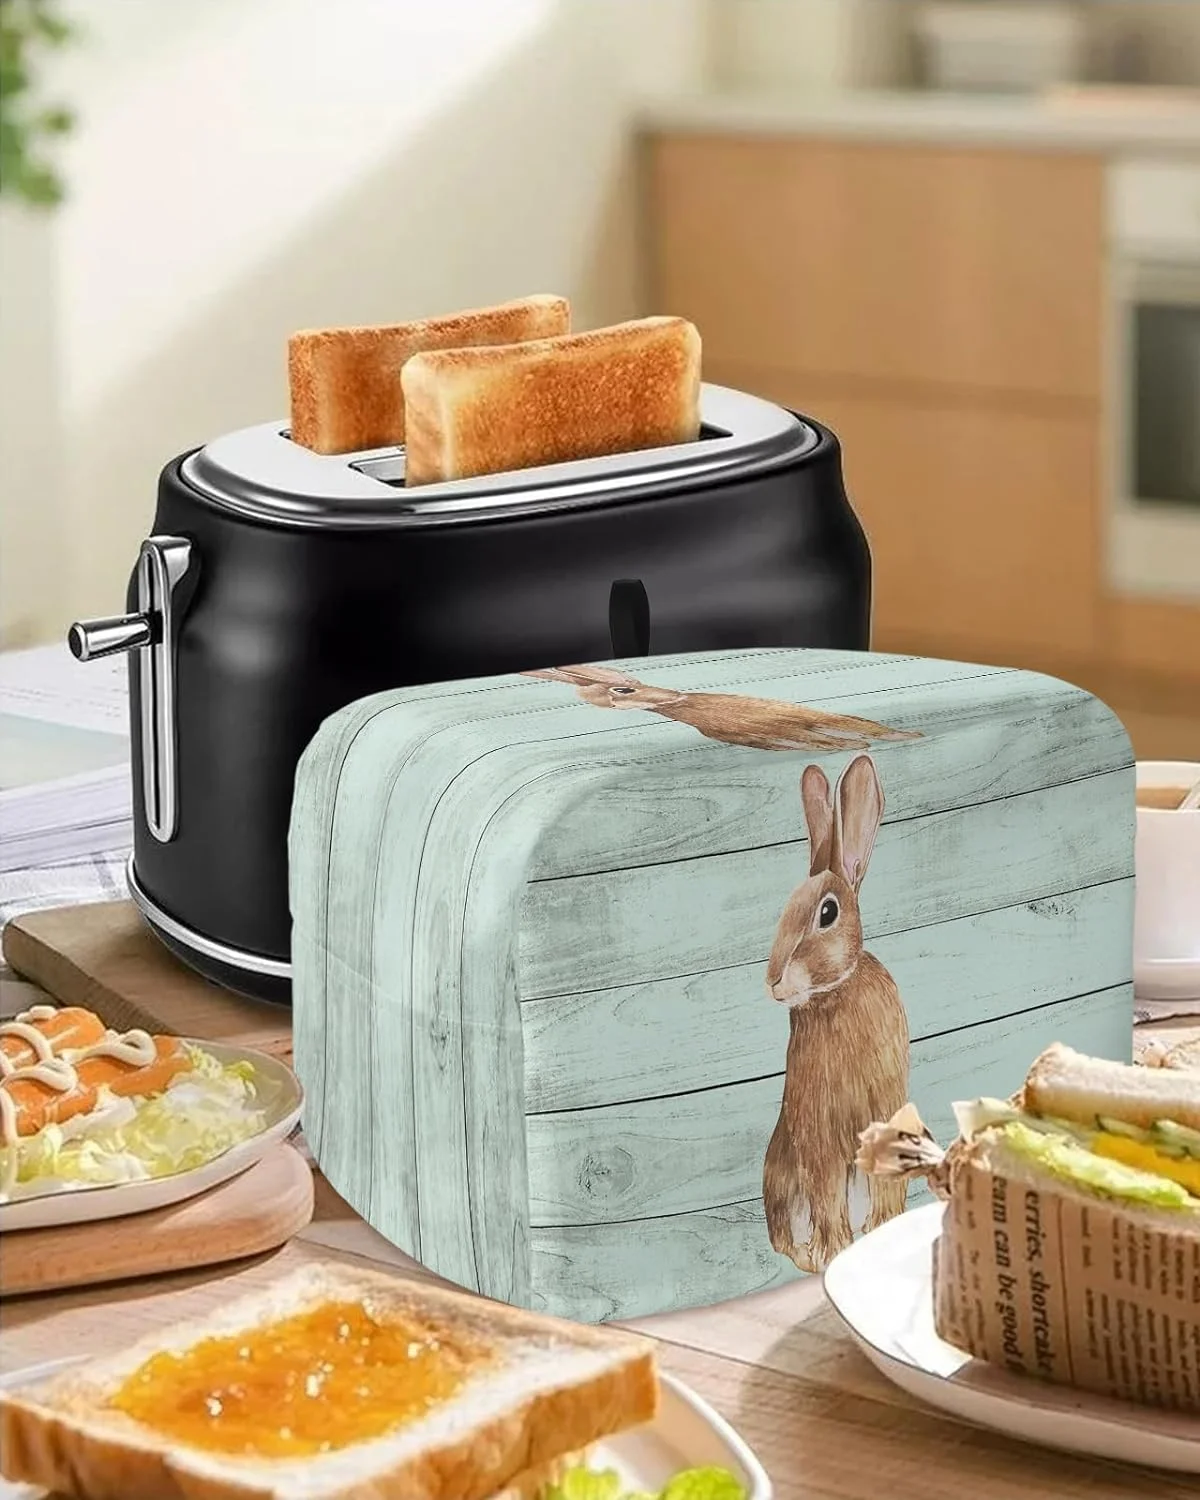 Toaster Covers 2 Slice Cute Bunny Bread Maker Cover Review